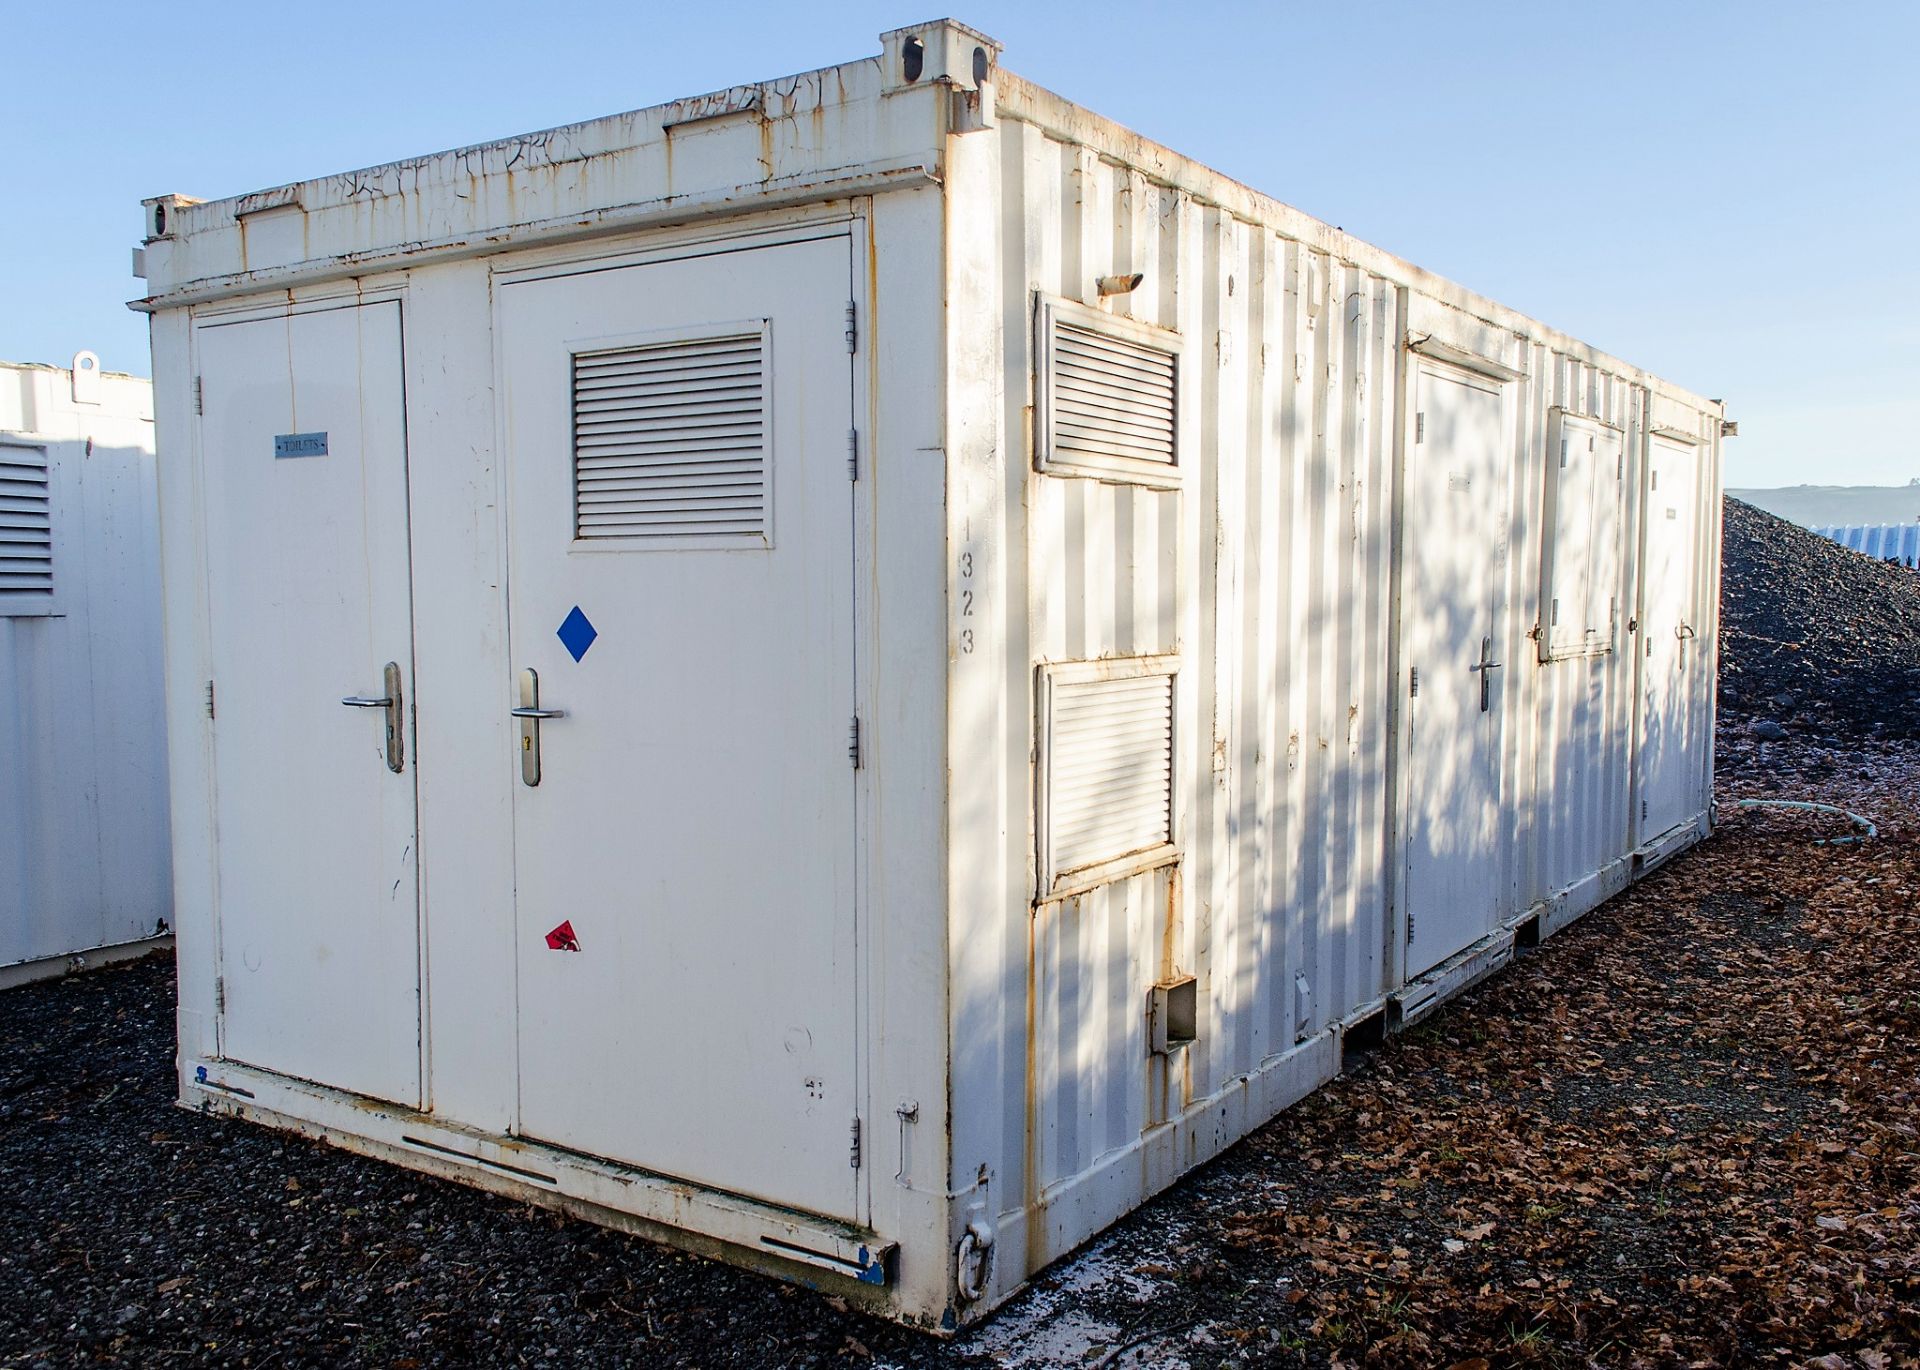 25ft x 9ft steel anti vandal welfare site unit Comprising of: Canteen area, drying room, office,